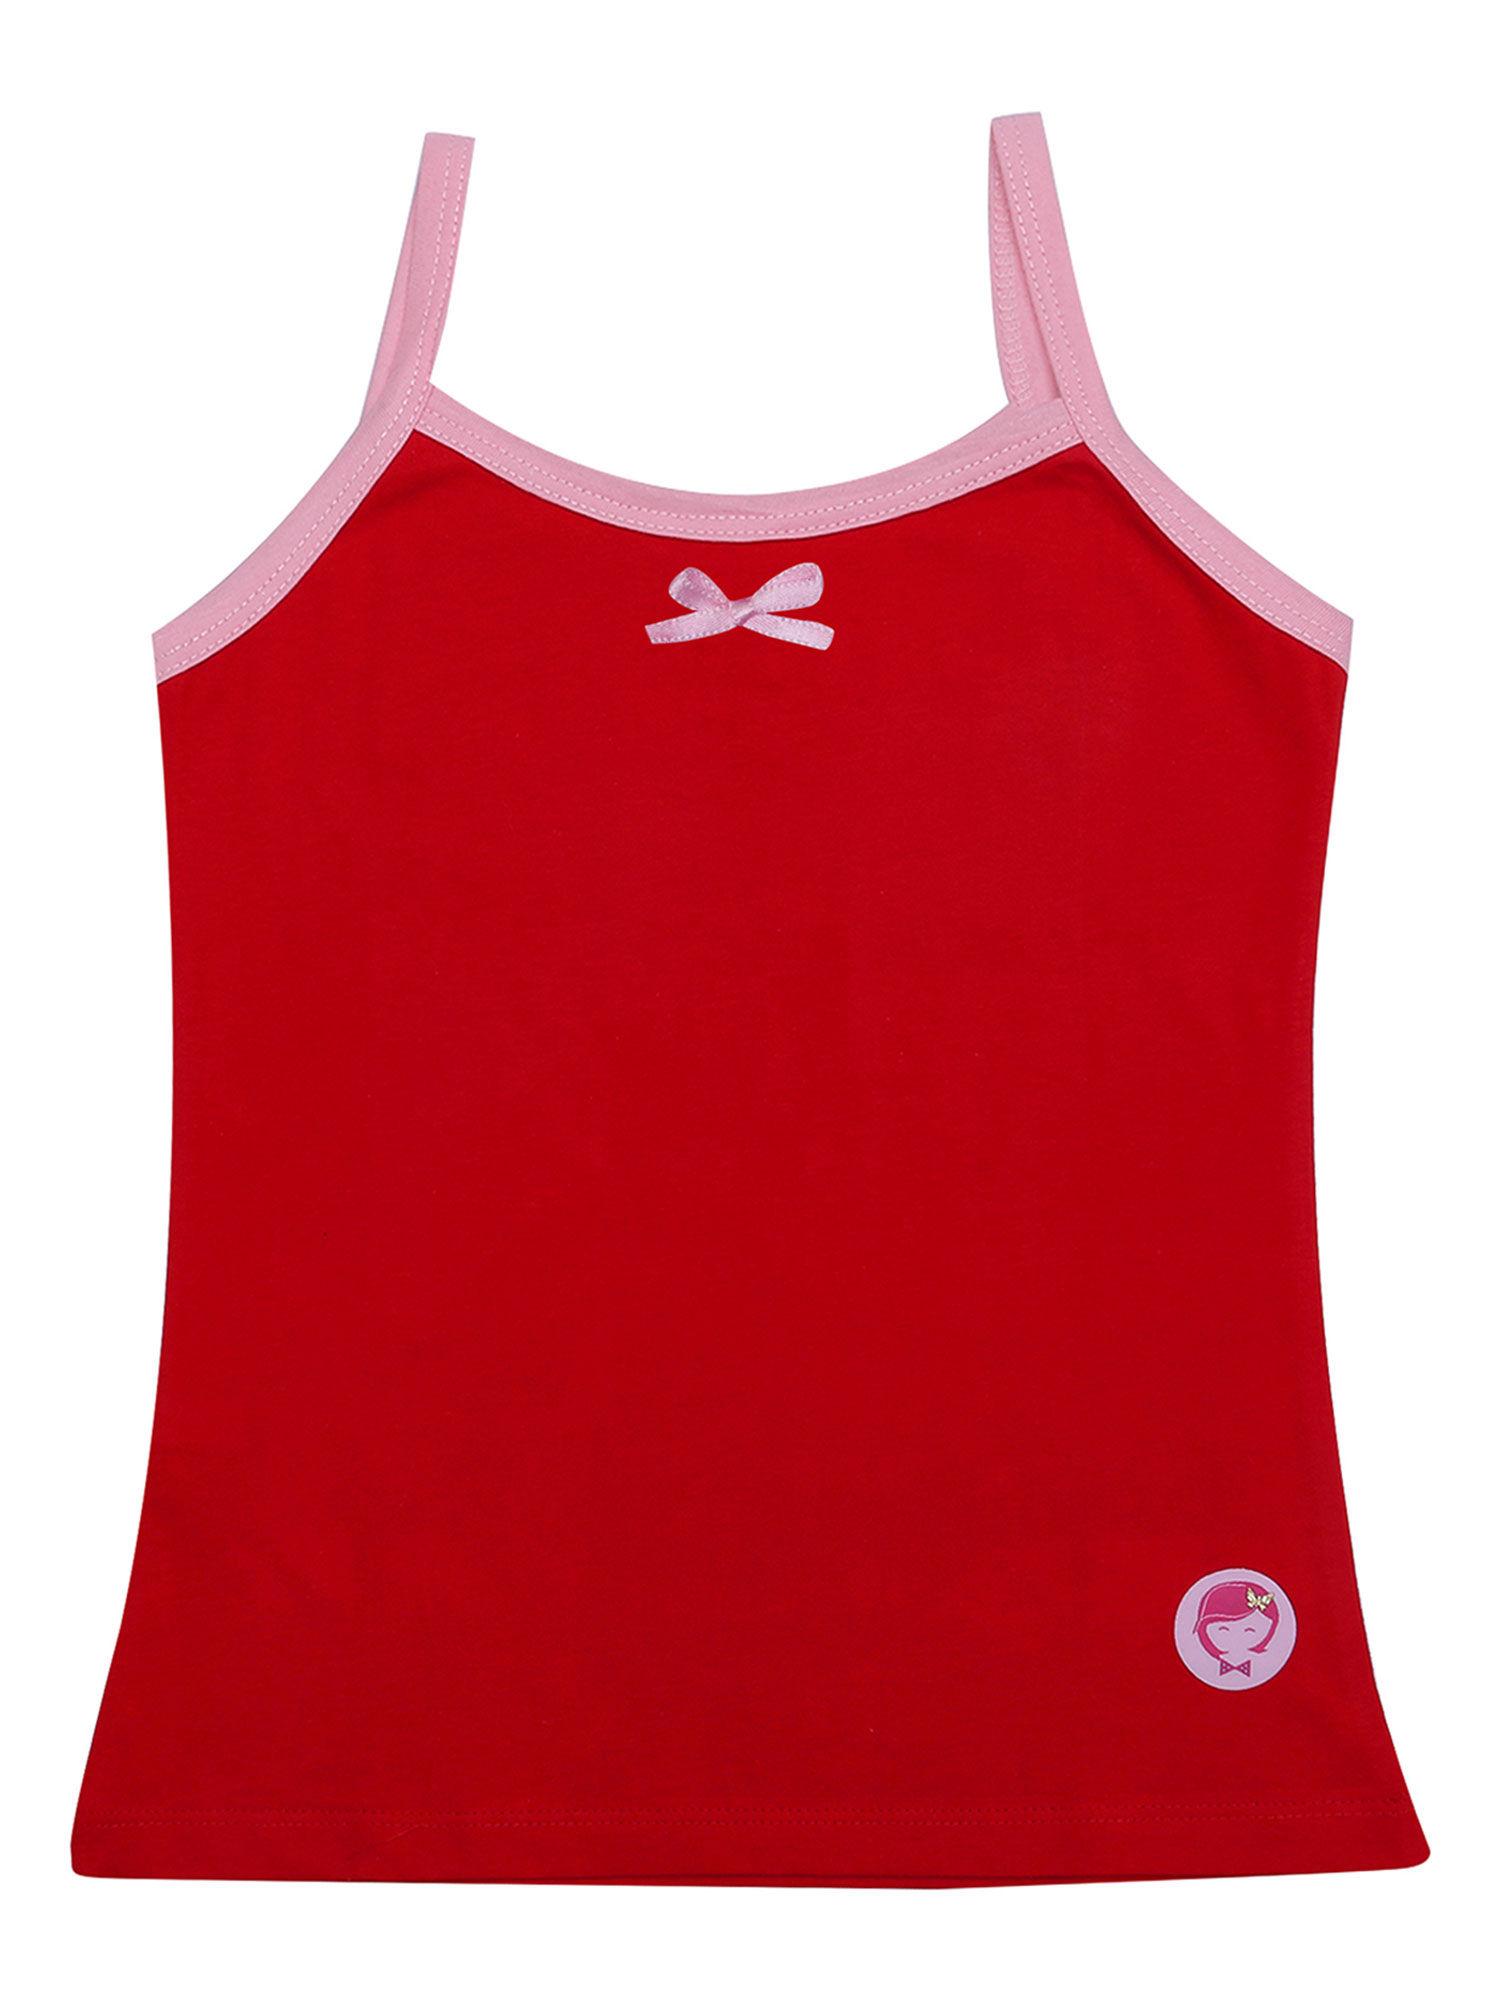 red camisole/slip for girls (pack of 1)